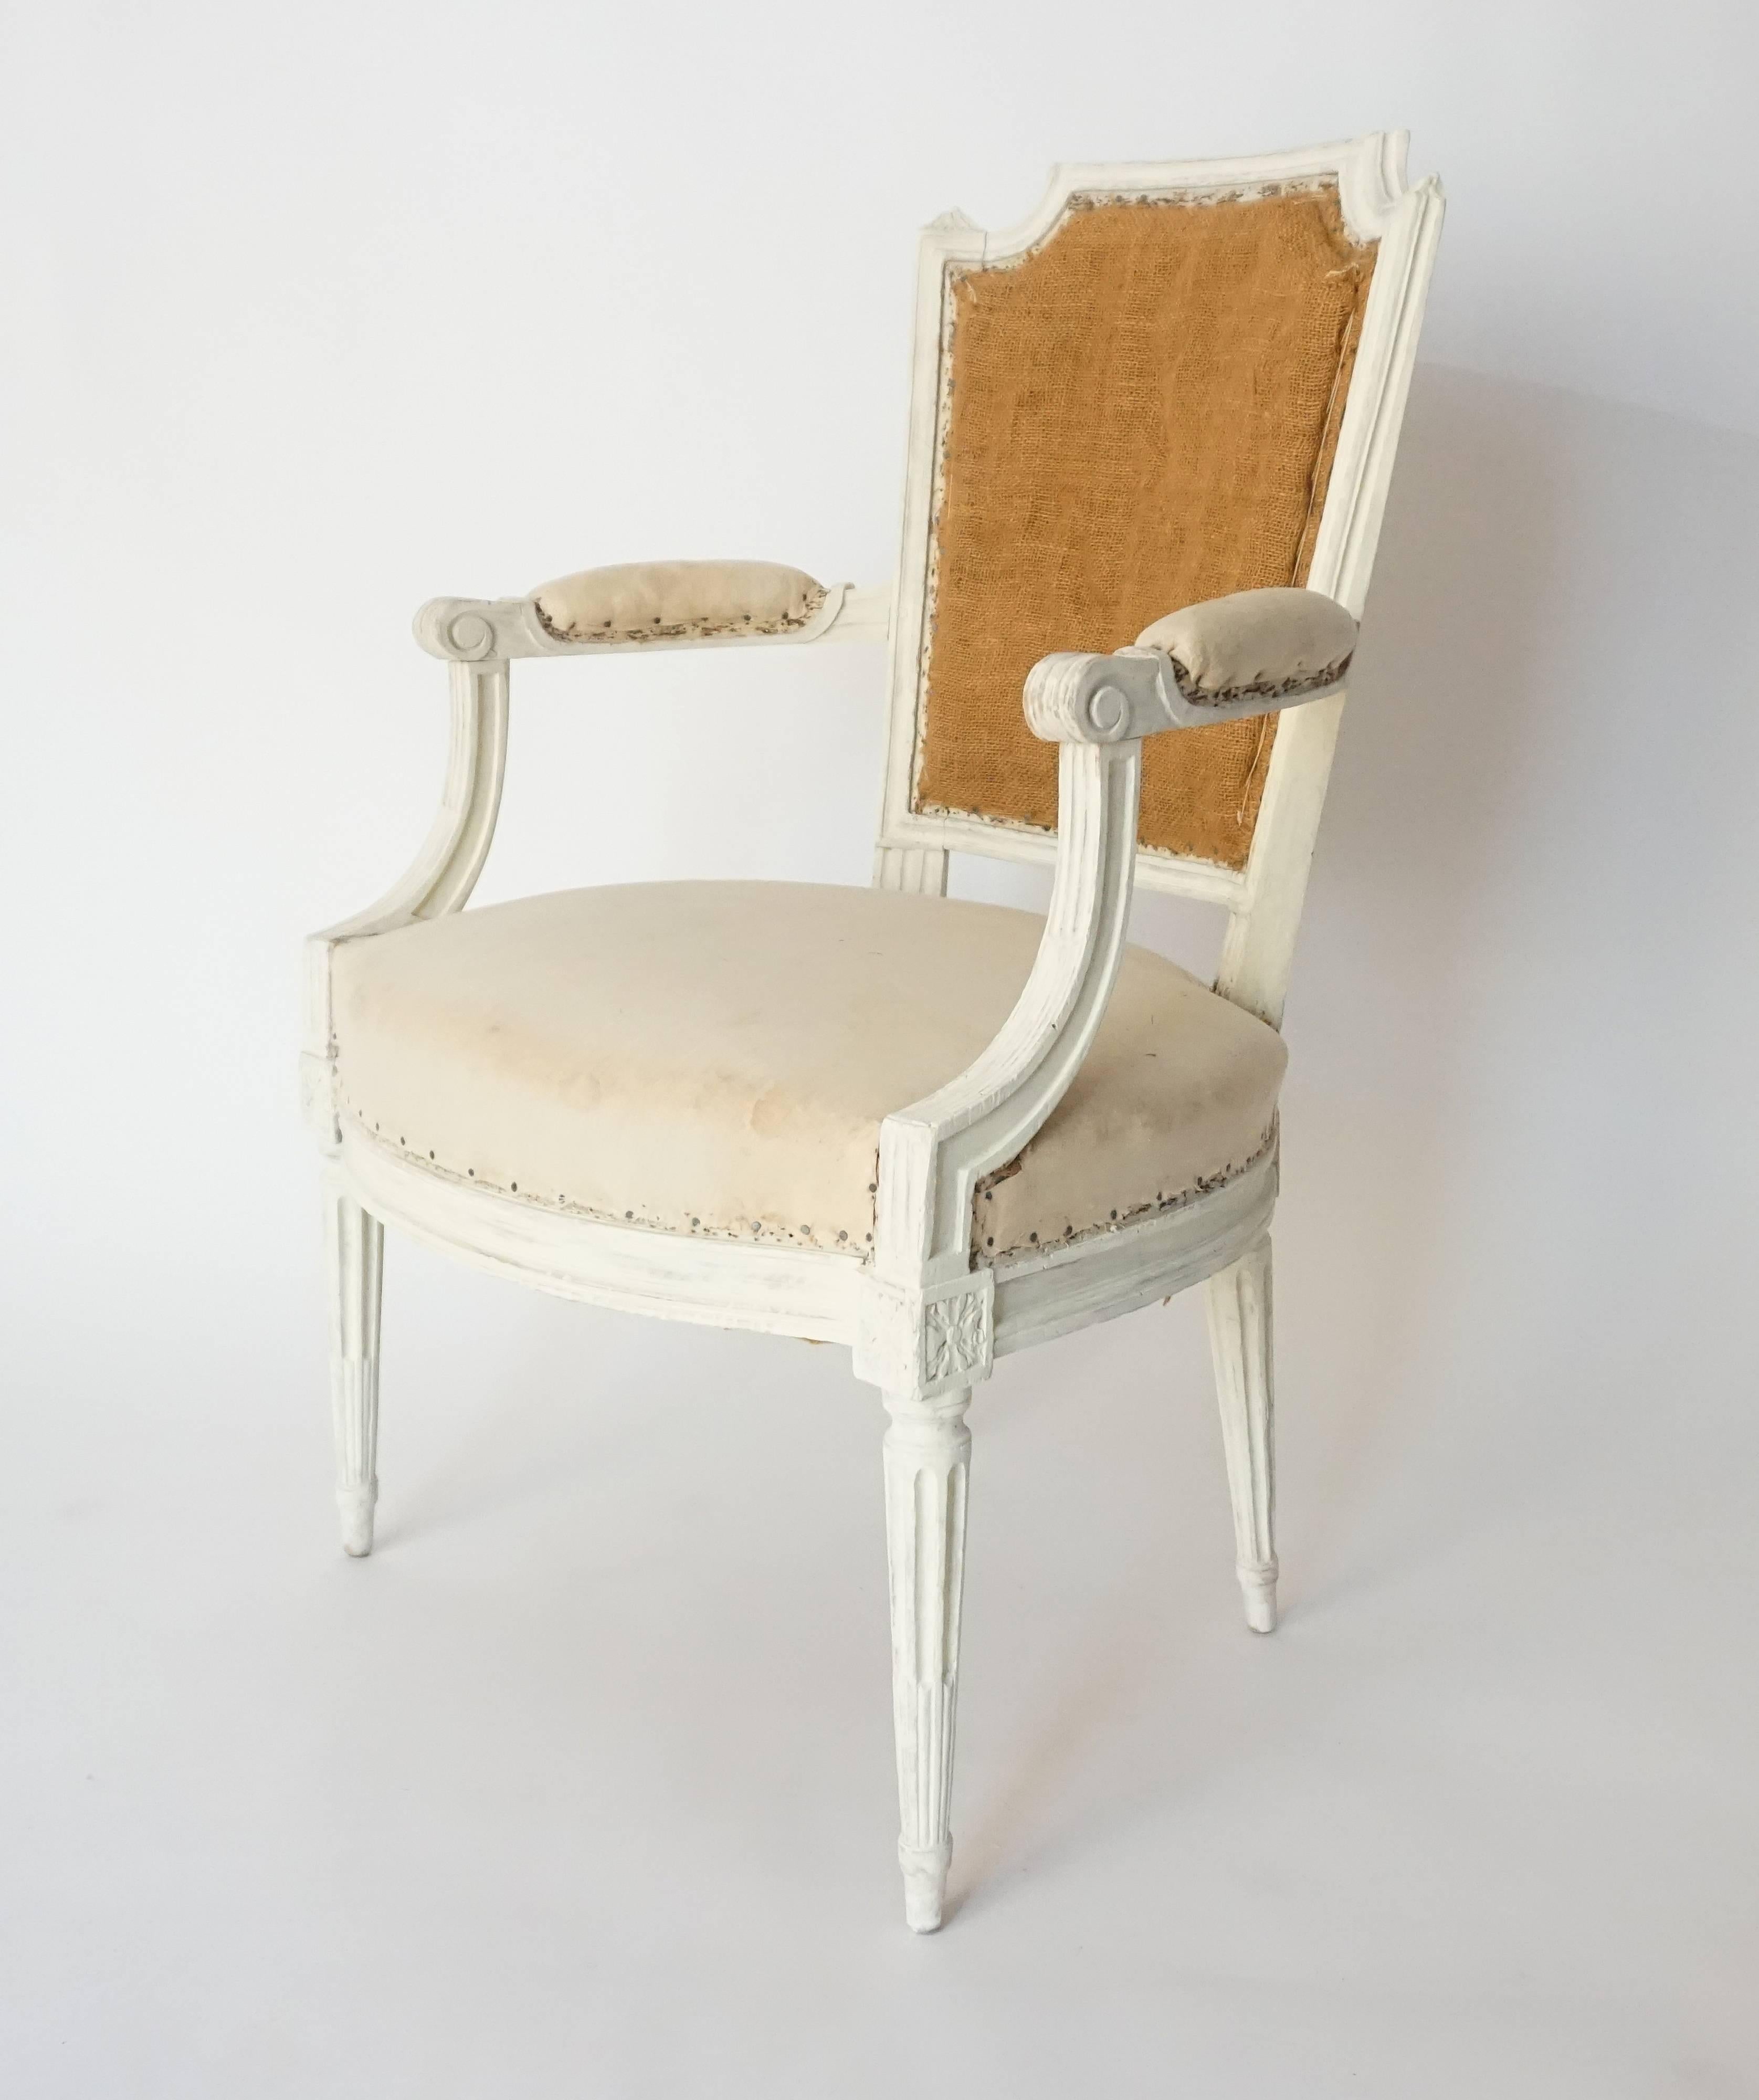 French Louis XVI Fauteuil or Armchair in Original Paint, Stamped, France, circa 1780